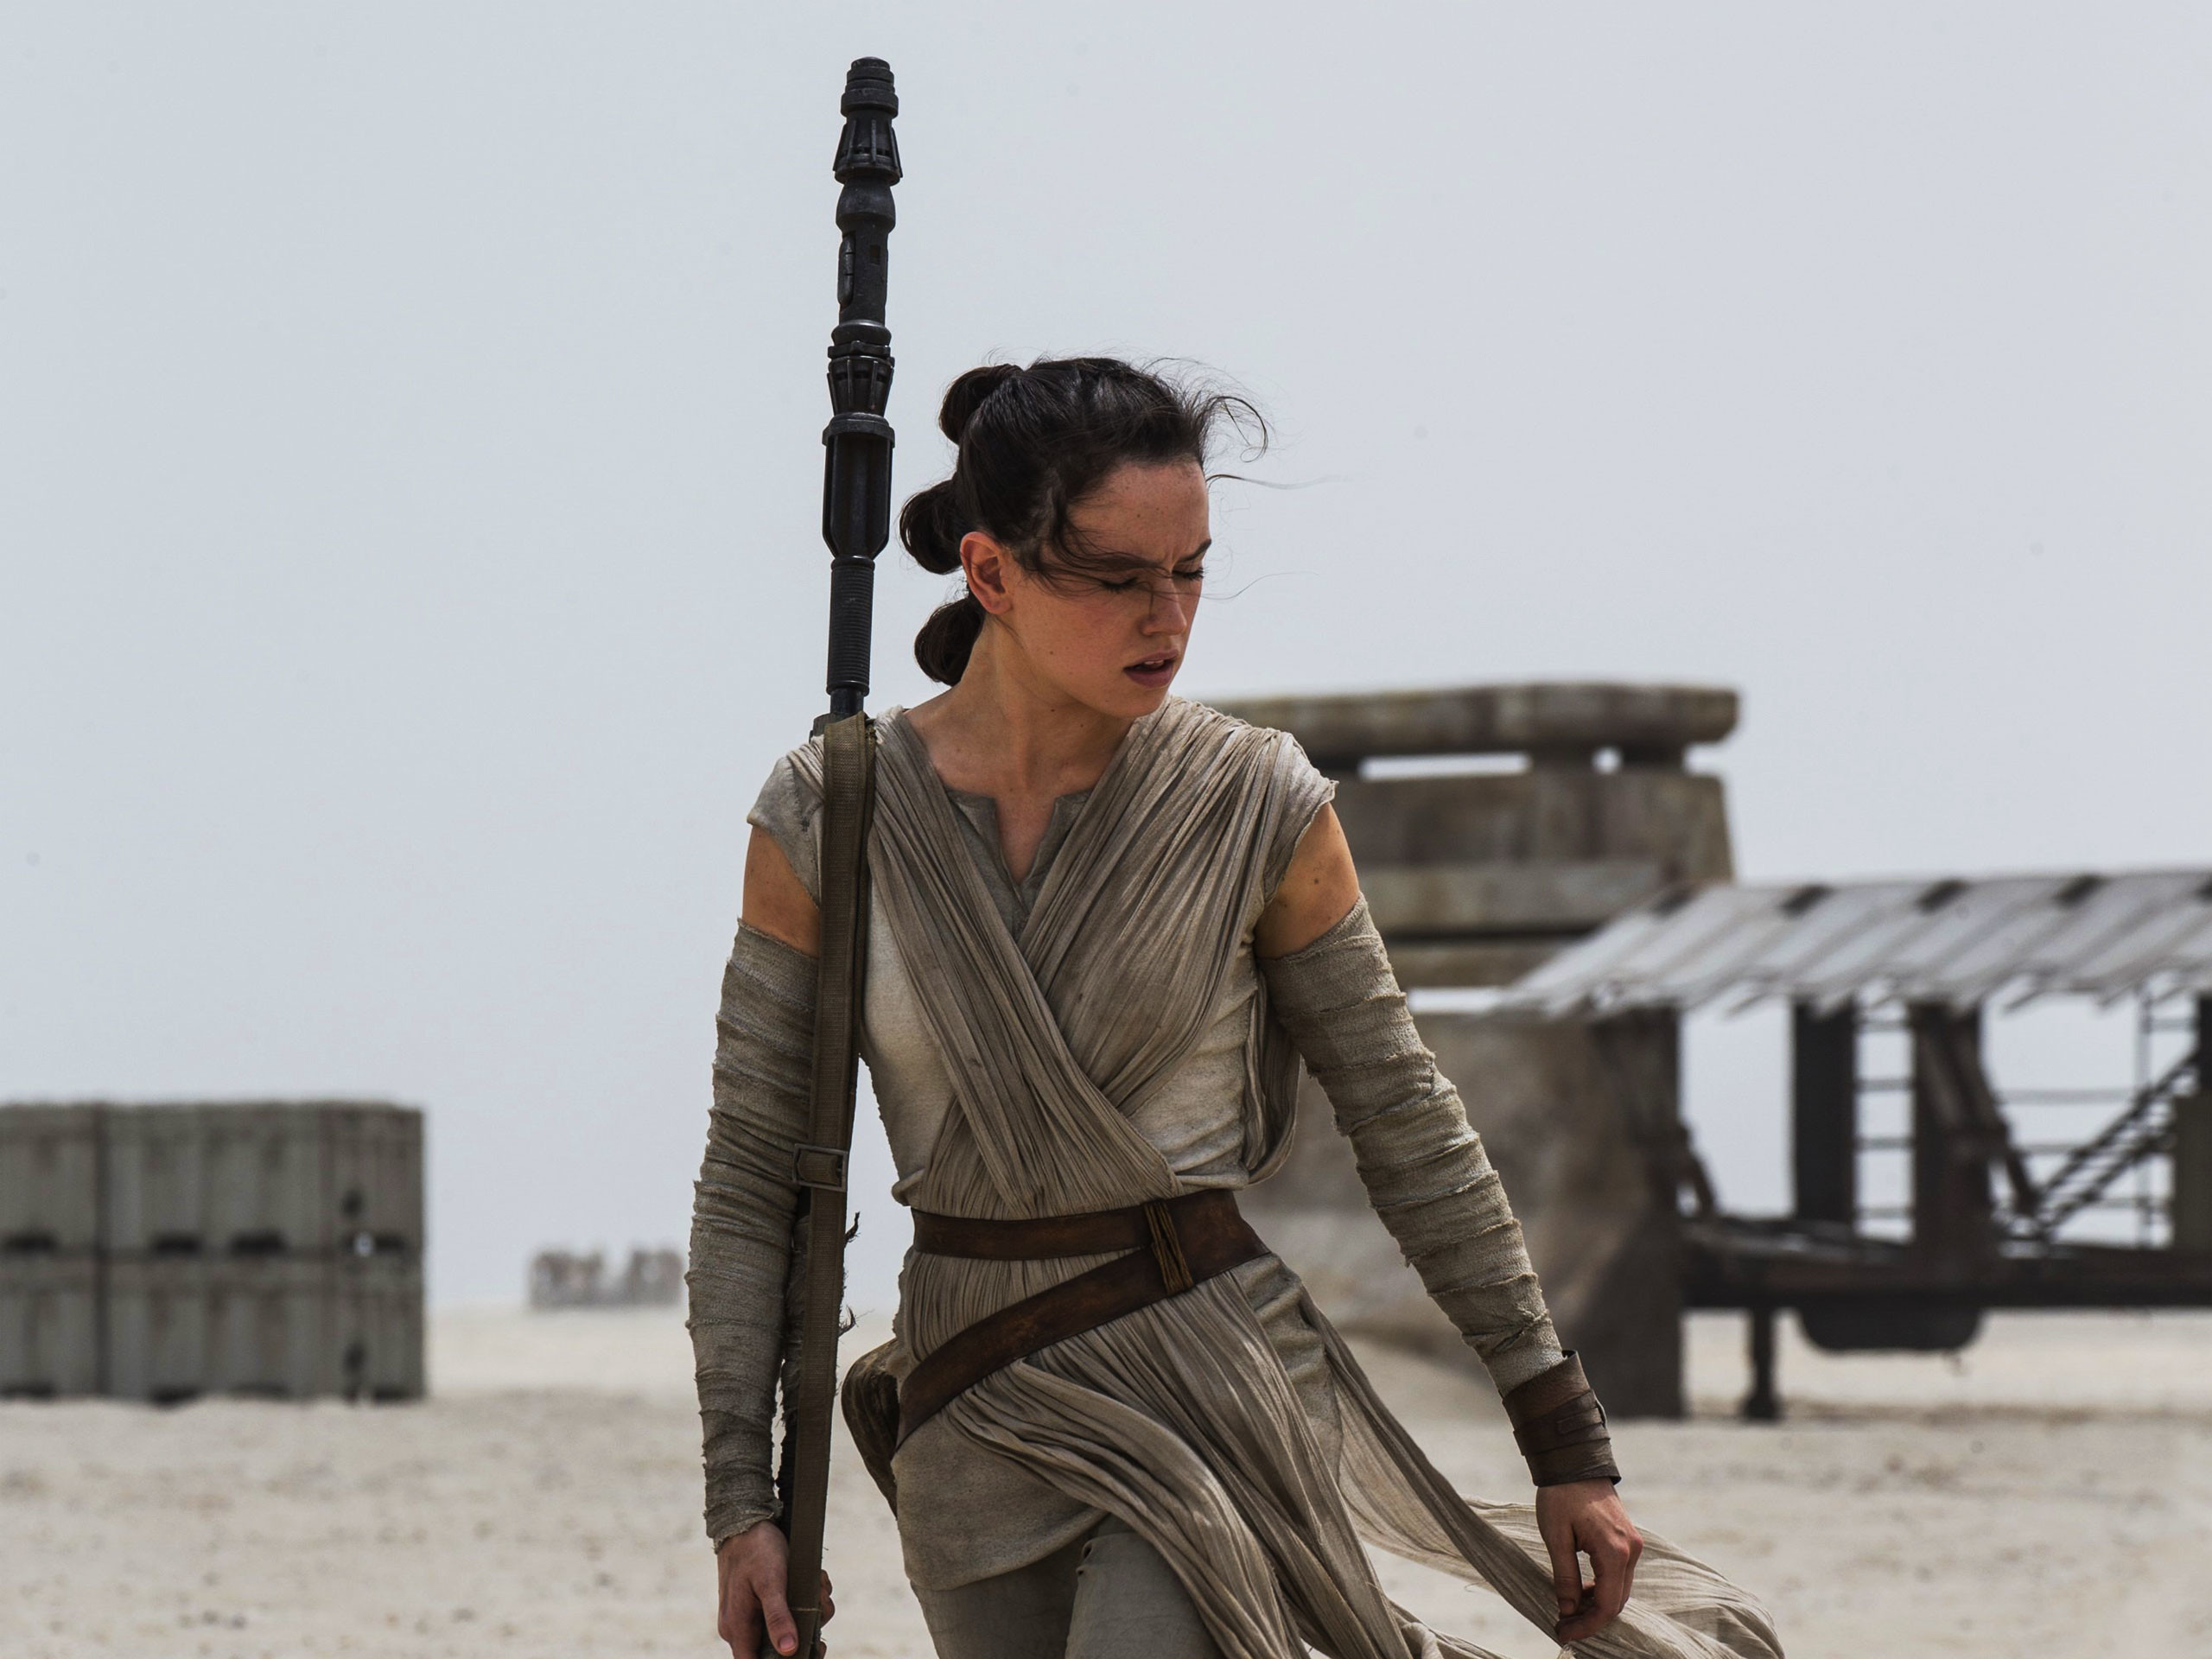 2560x1920 Rey from Star Wars 7: The Force Awakens  wallpaper